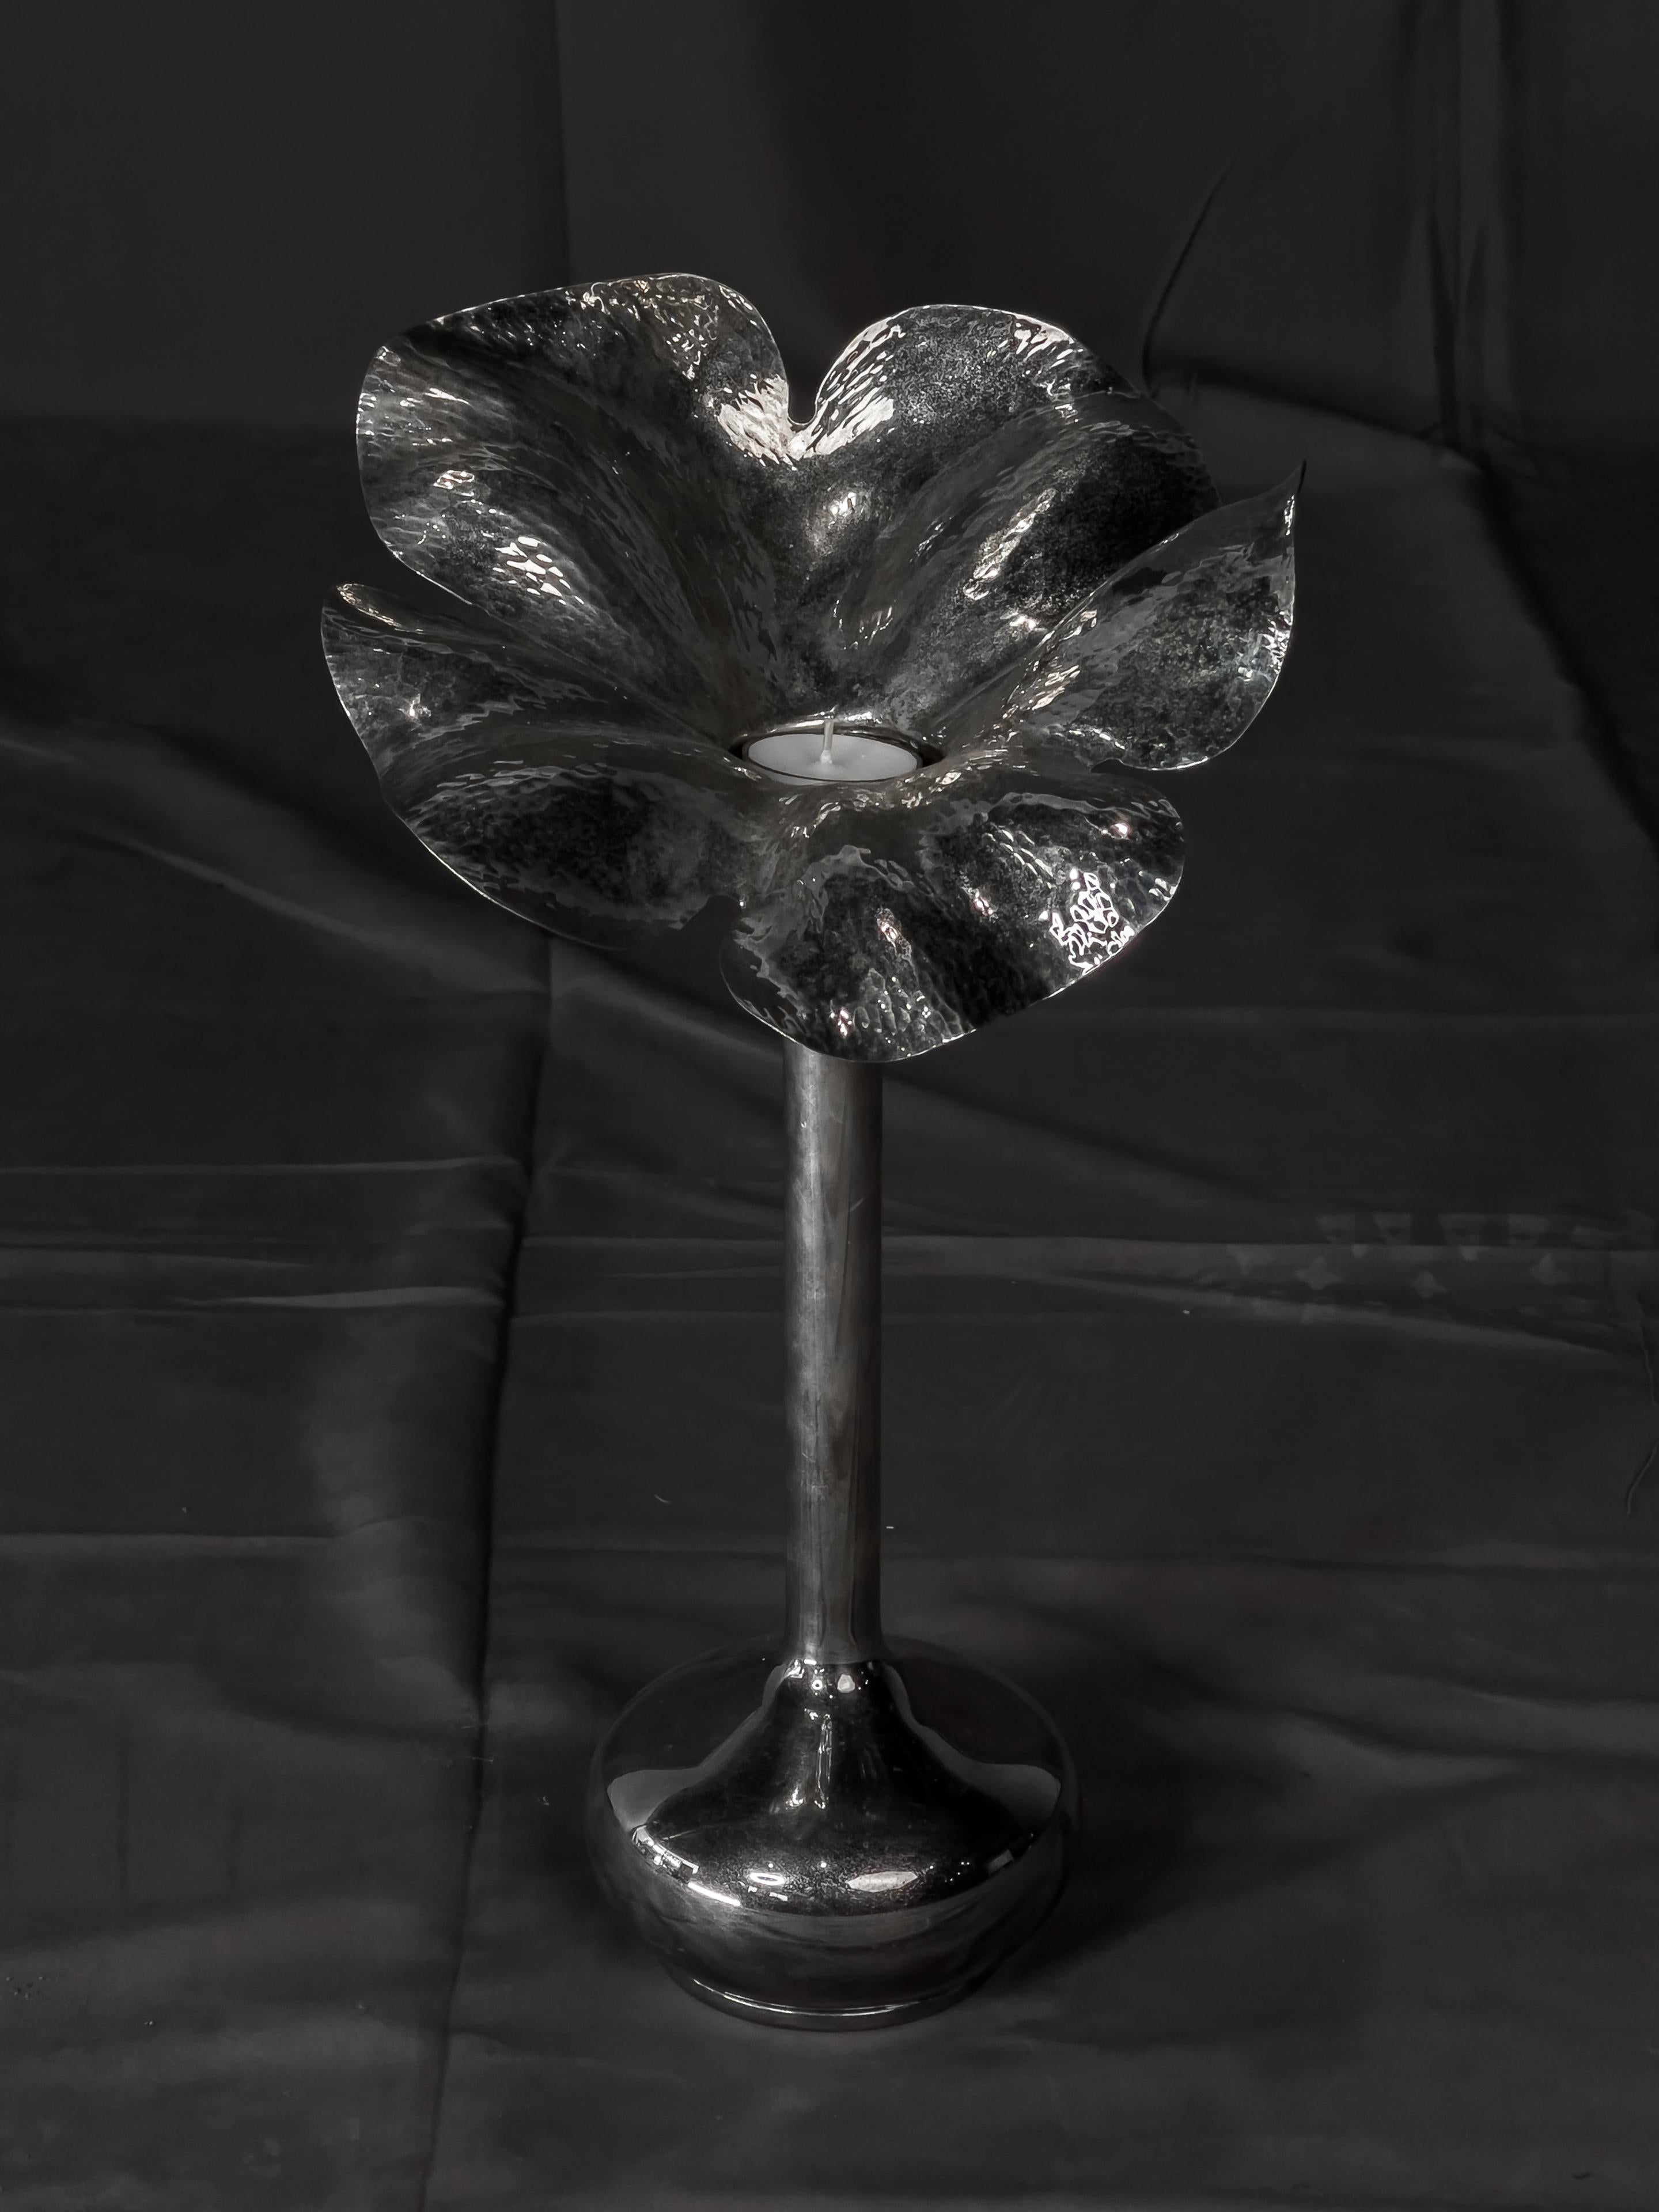 Handmade fancy Silverplate  Floriform vase. Silver plate over brass by the noted 20th century Brazilian gold-smith M.M. Evolucao and so signed on the bottom along with his trade mark.   

This is a great vintage piece.  We also have posted a second